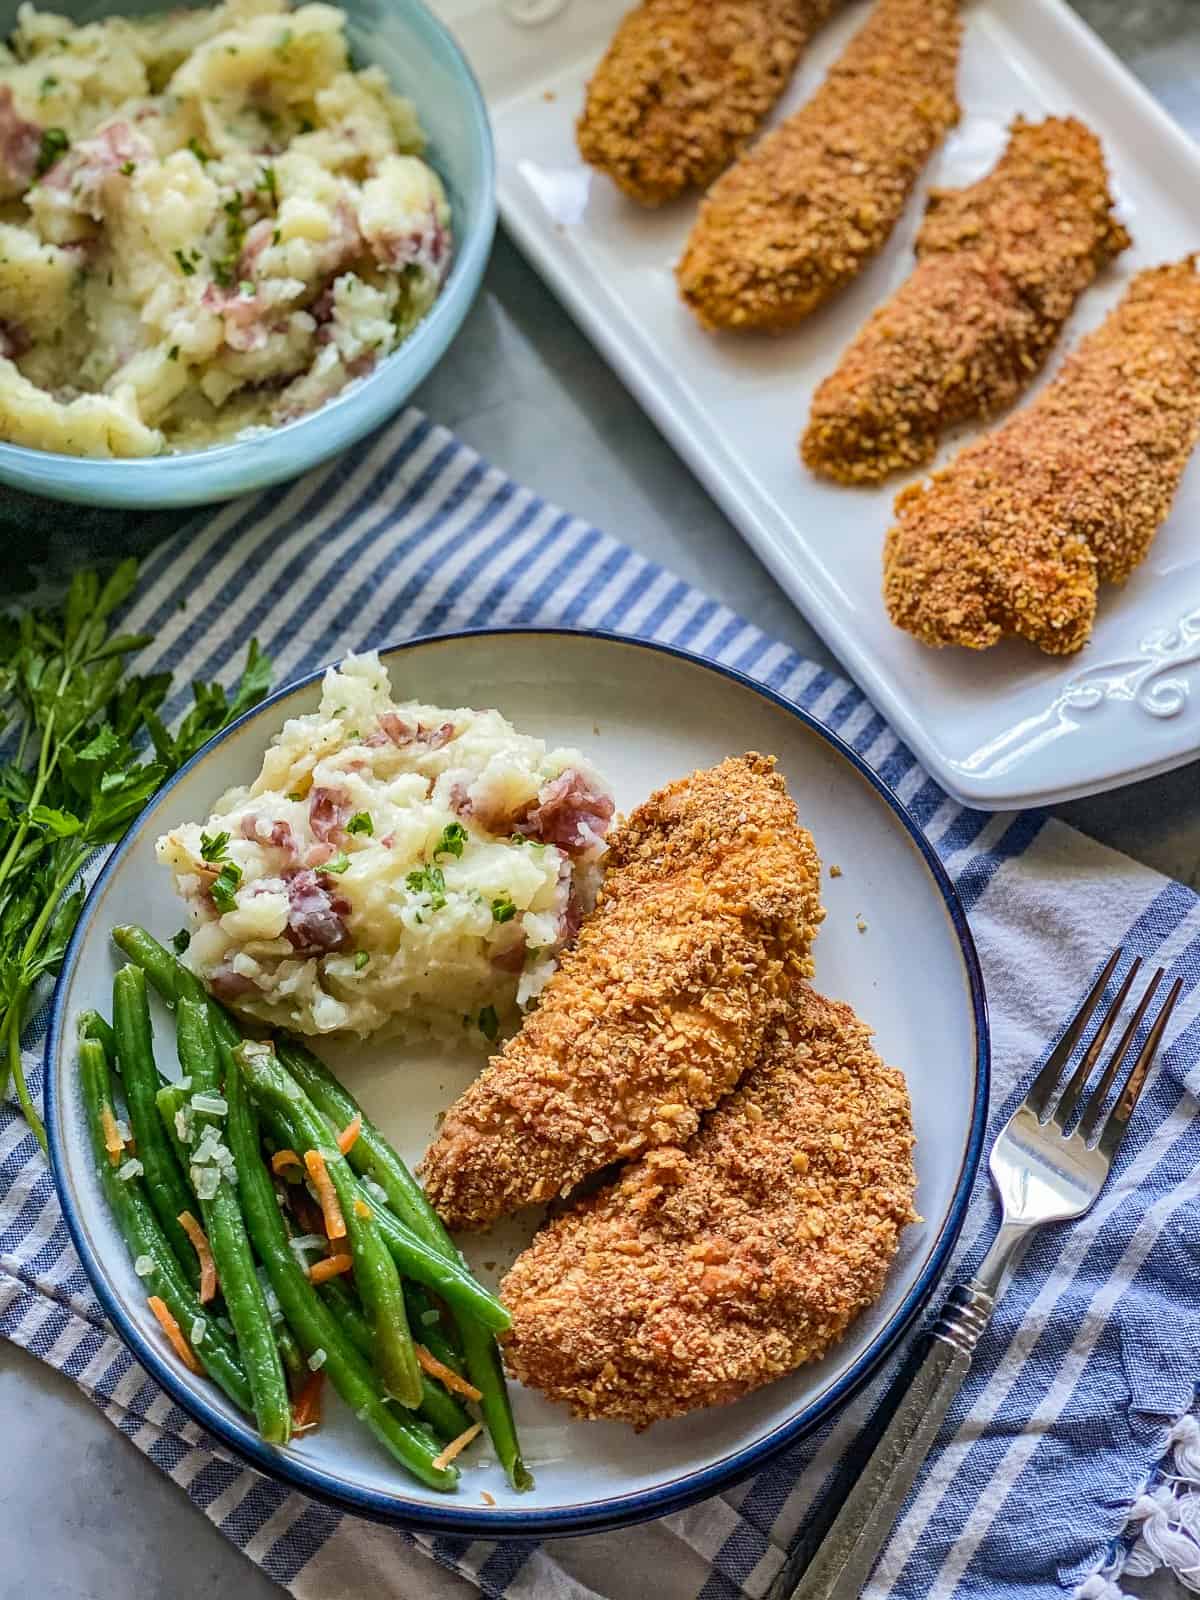 a white plate with two pieces of chicken tenders next to green beans with yellow cheese flakes and mashed potatoes with green scallion and red bacon bits.